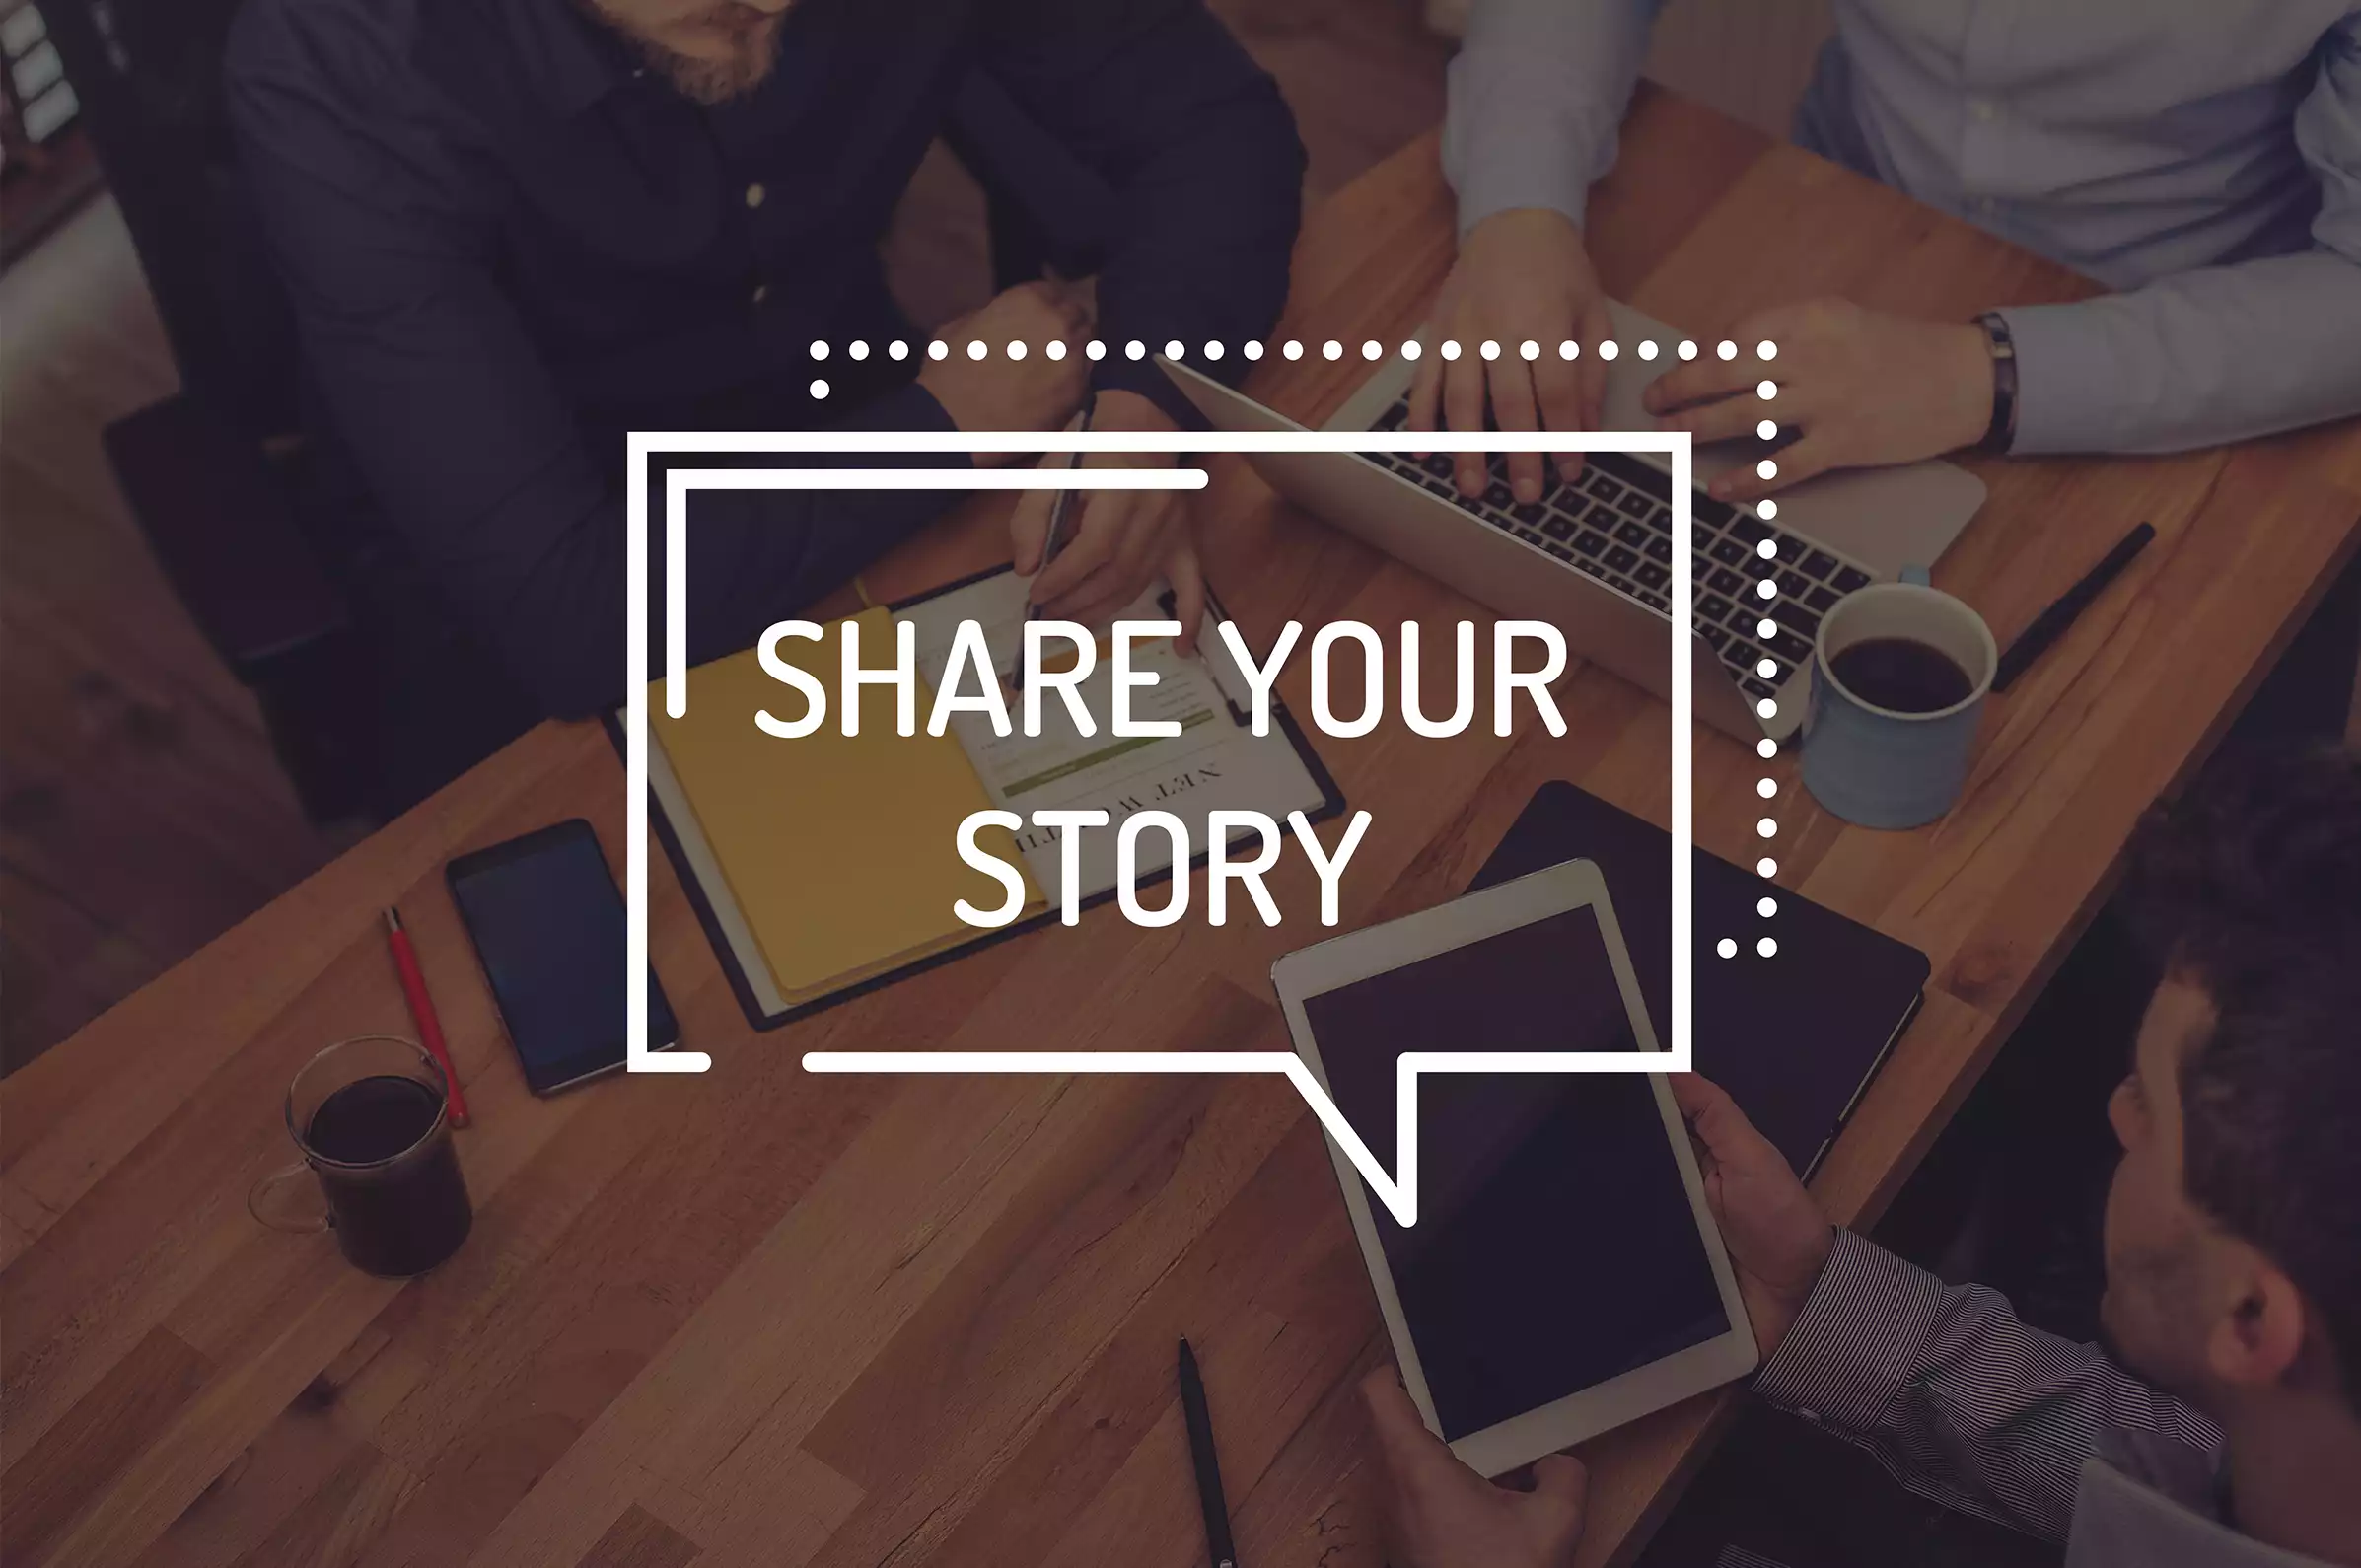 Share your personal why story